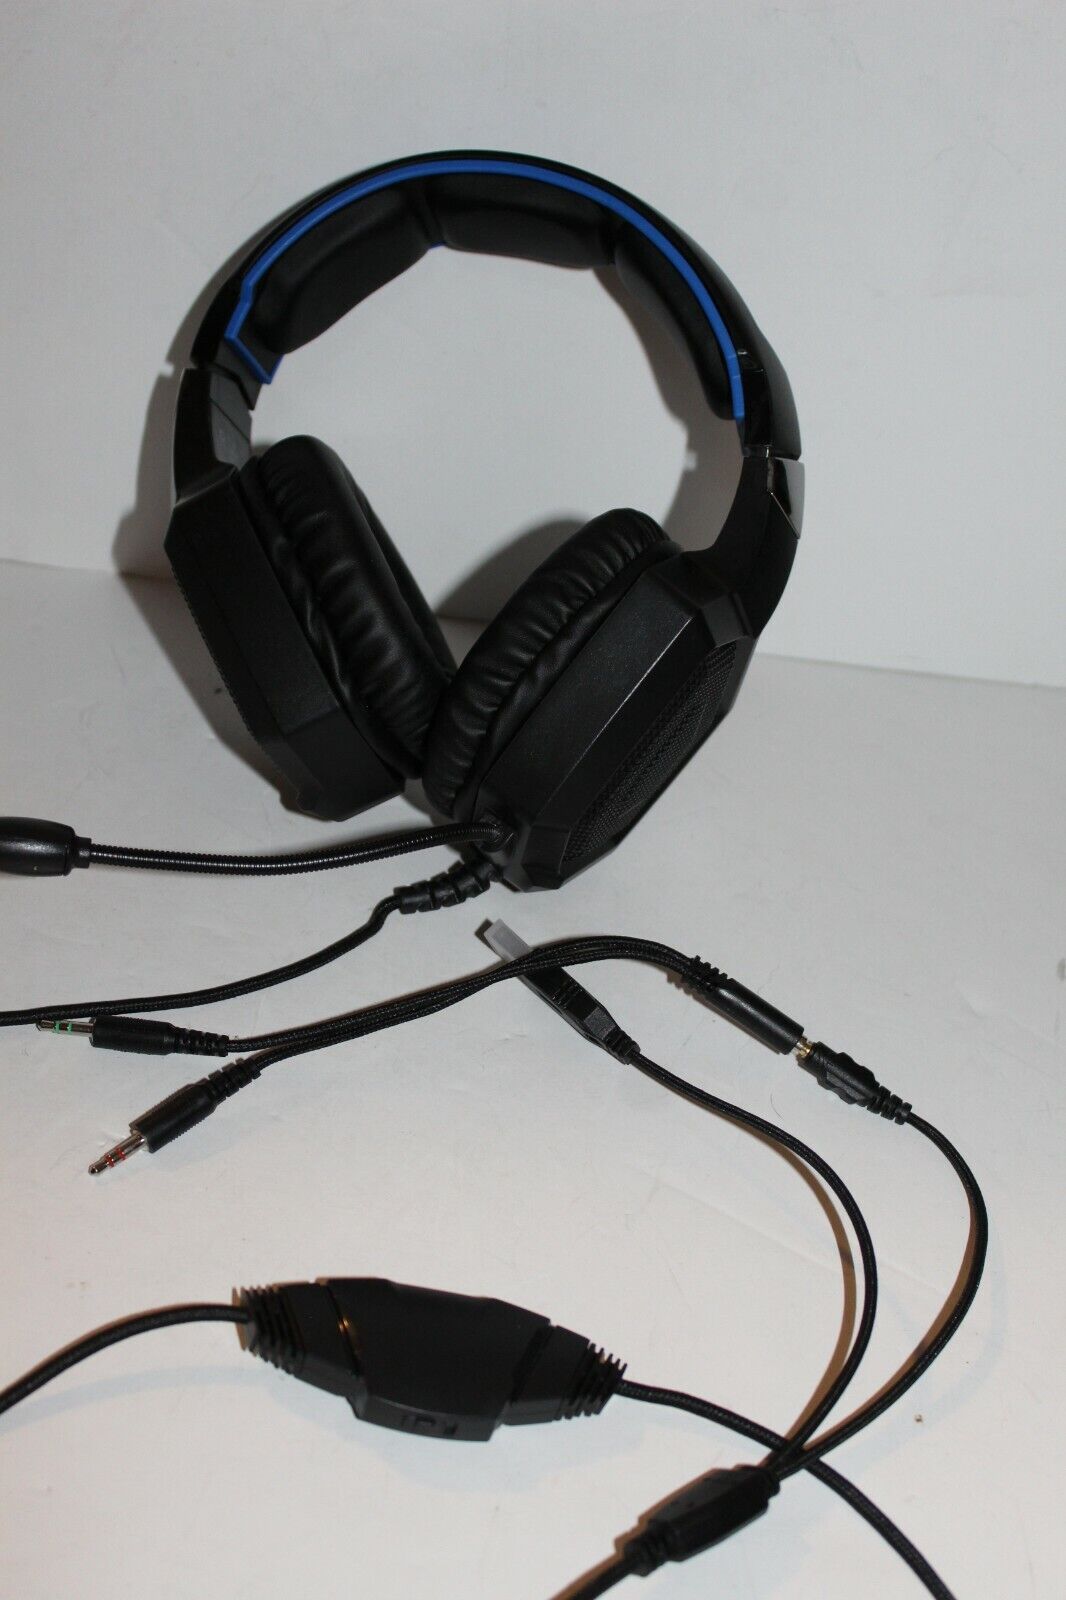 Run Mus K8 Stereo Gaming Headset for PS4 PC Surround Sound LED Mic As Shown